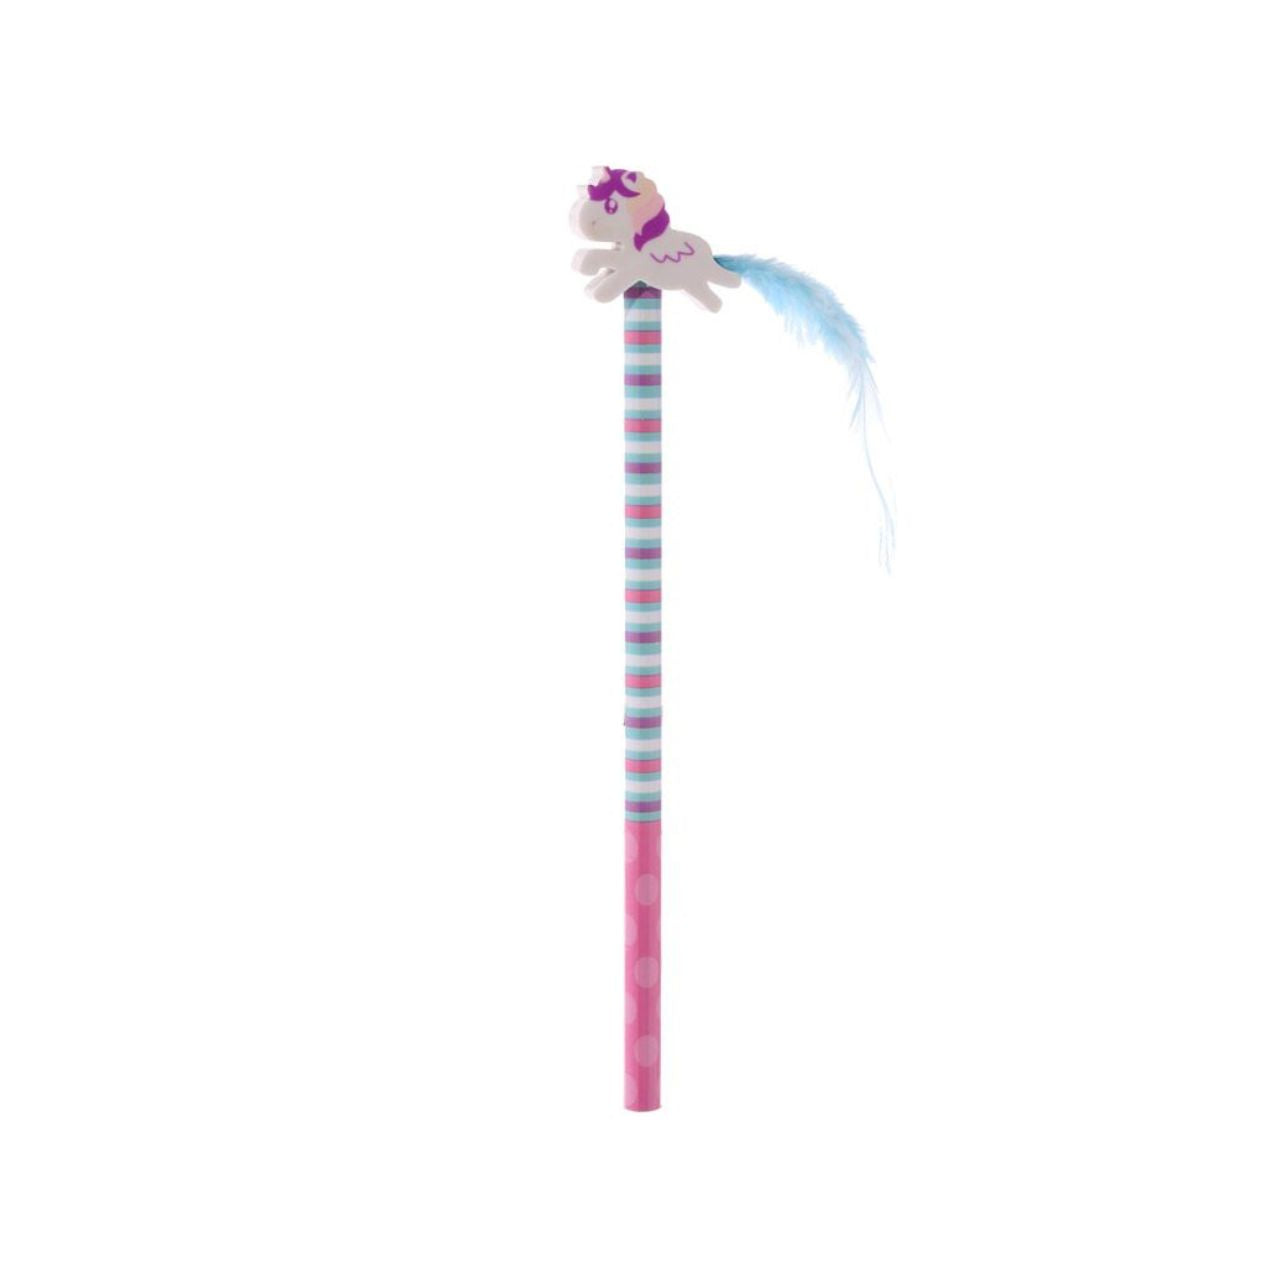 Add a touch of whimsy to your writing with our Unicorn Pencil &amp; Eraser Topper. Made for both kids and adults, this topper adds fun and function to your pencils. The topper is designed as a beautifully detailed unicorn and the eraser is perfectly shaped for easy erasing. Experience the magic of writing with our Unicorn Pencil &amp; Eraser Topper.